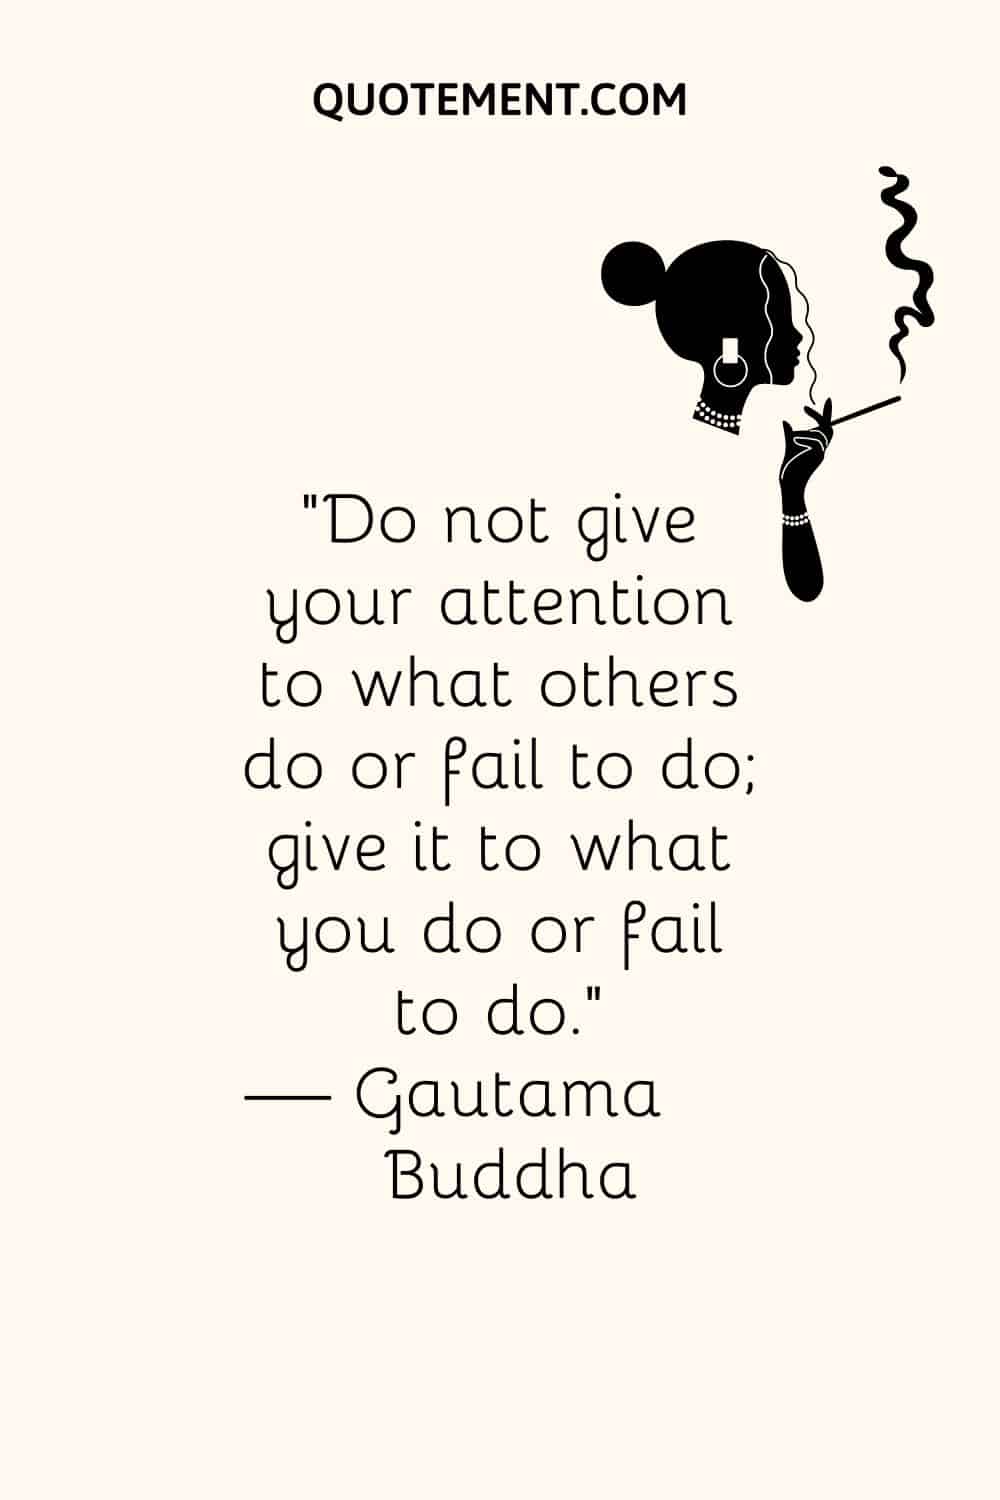 Do not give your attention to what others do or fail to do